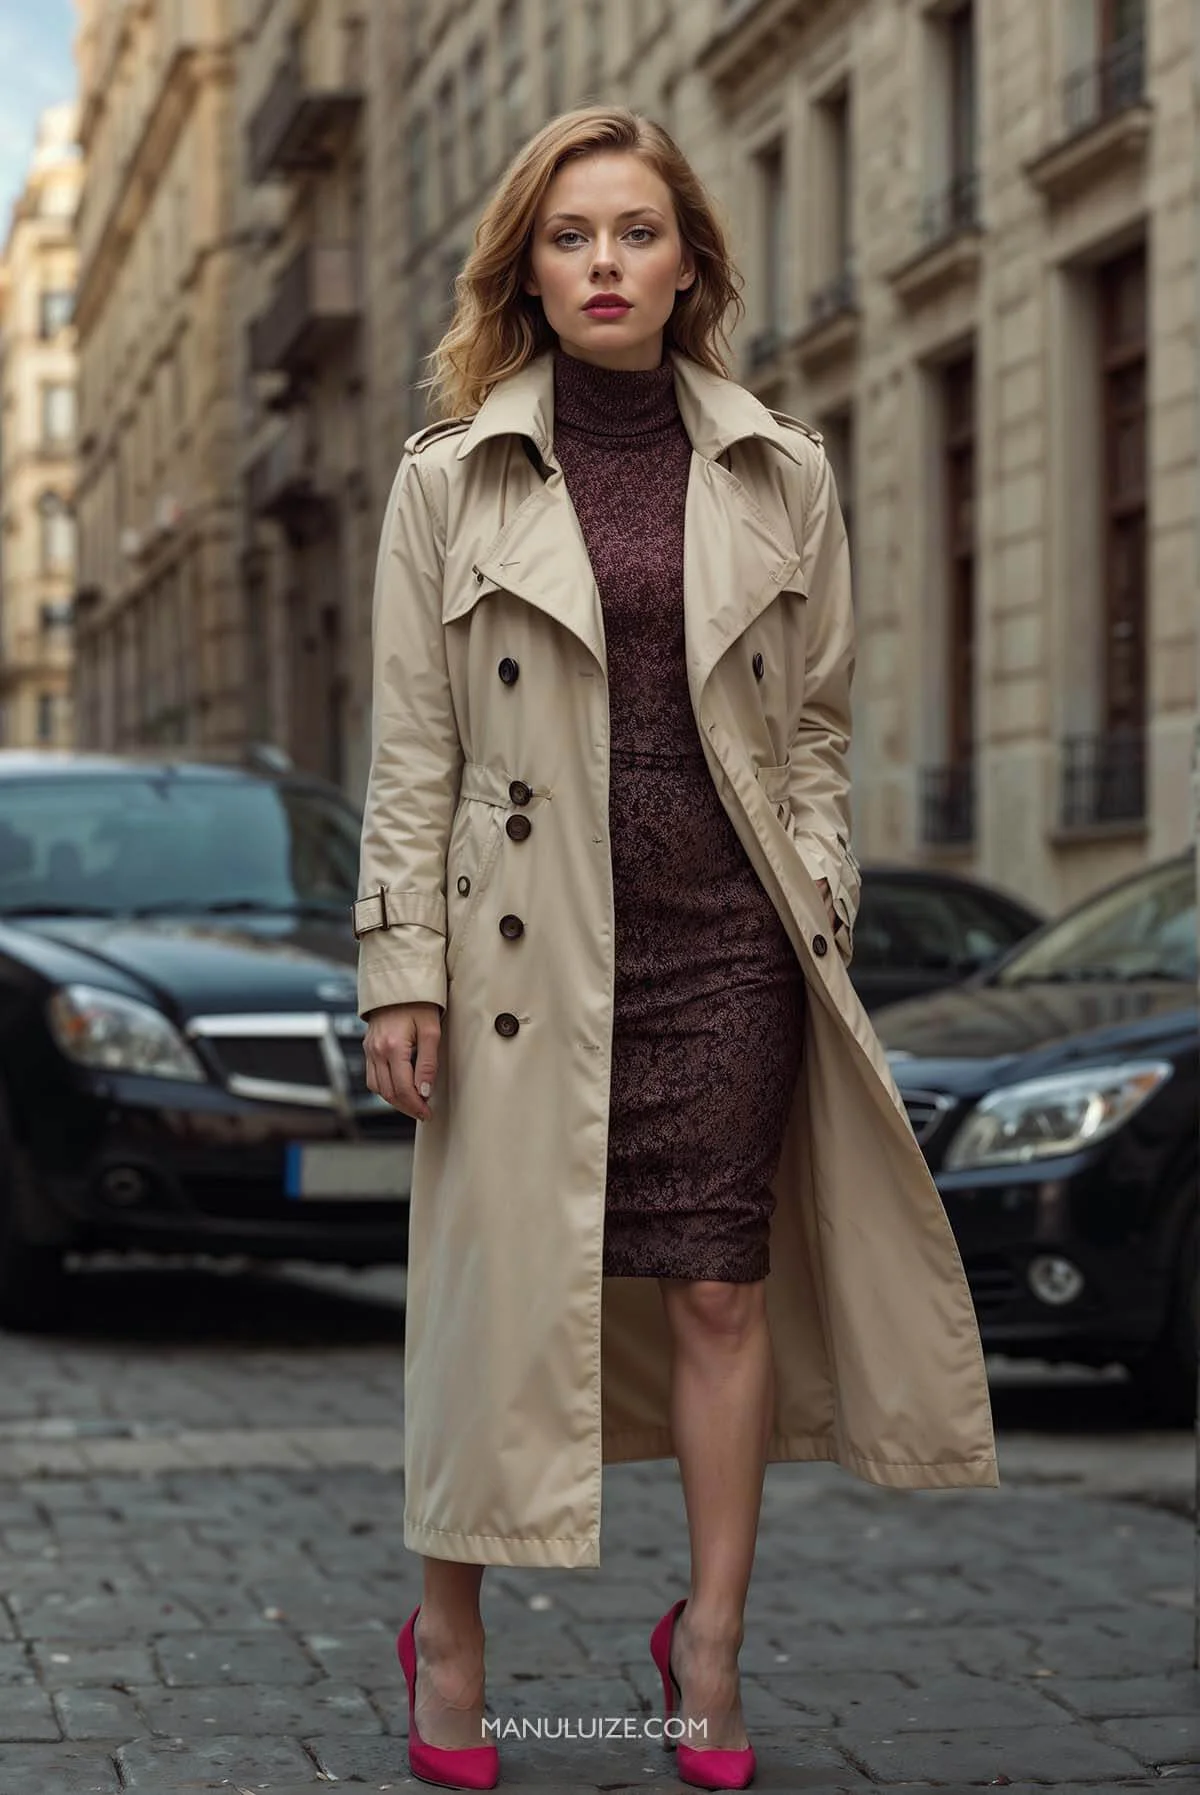 Winter trench coat outfit